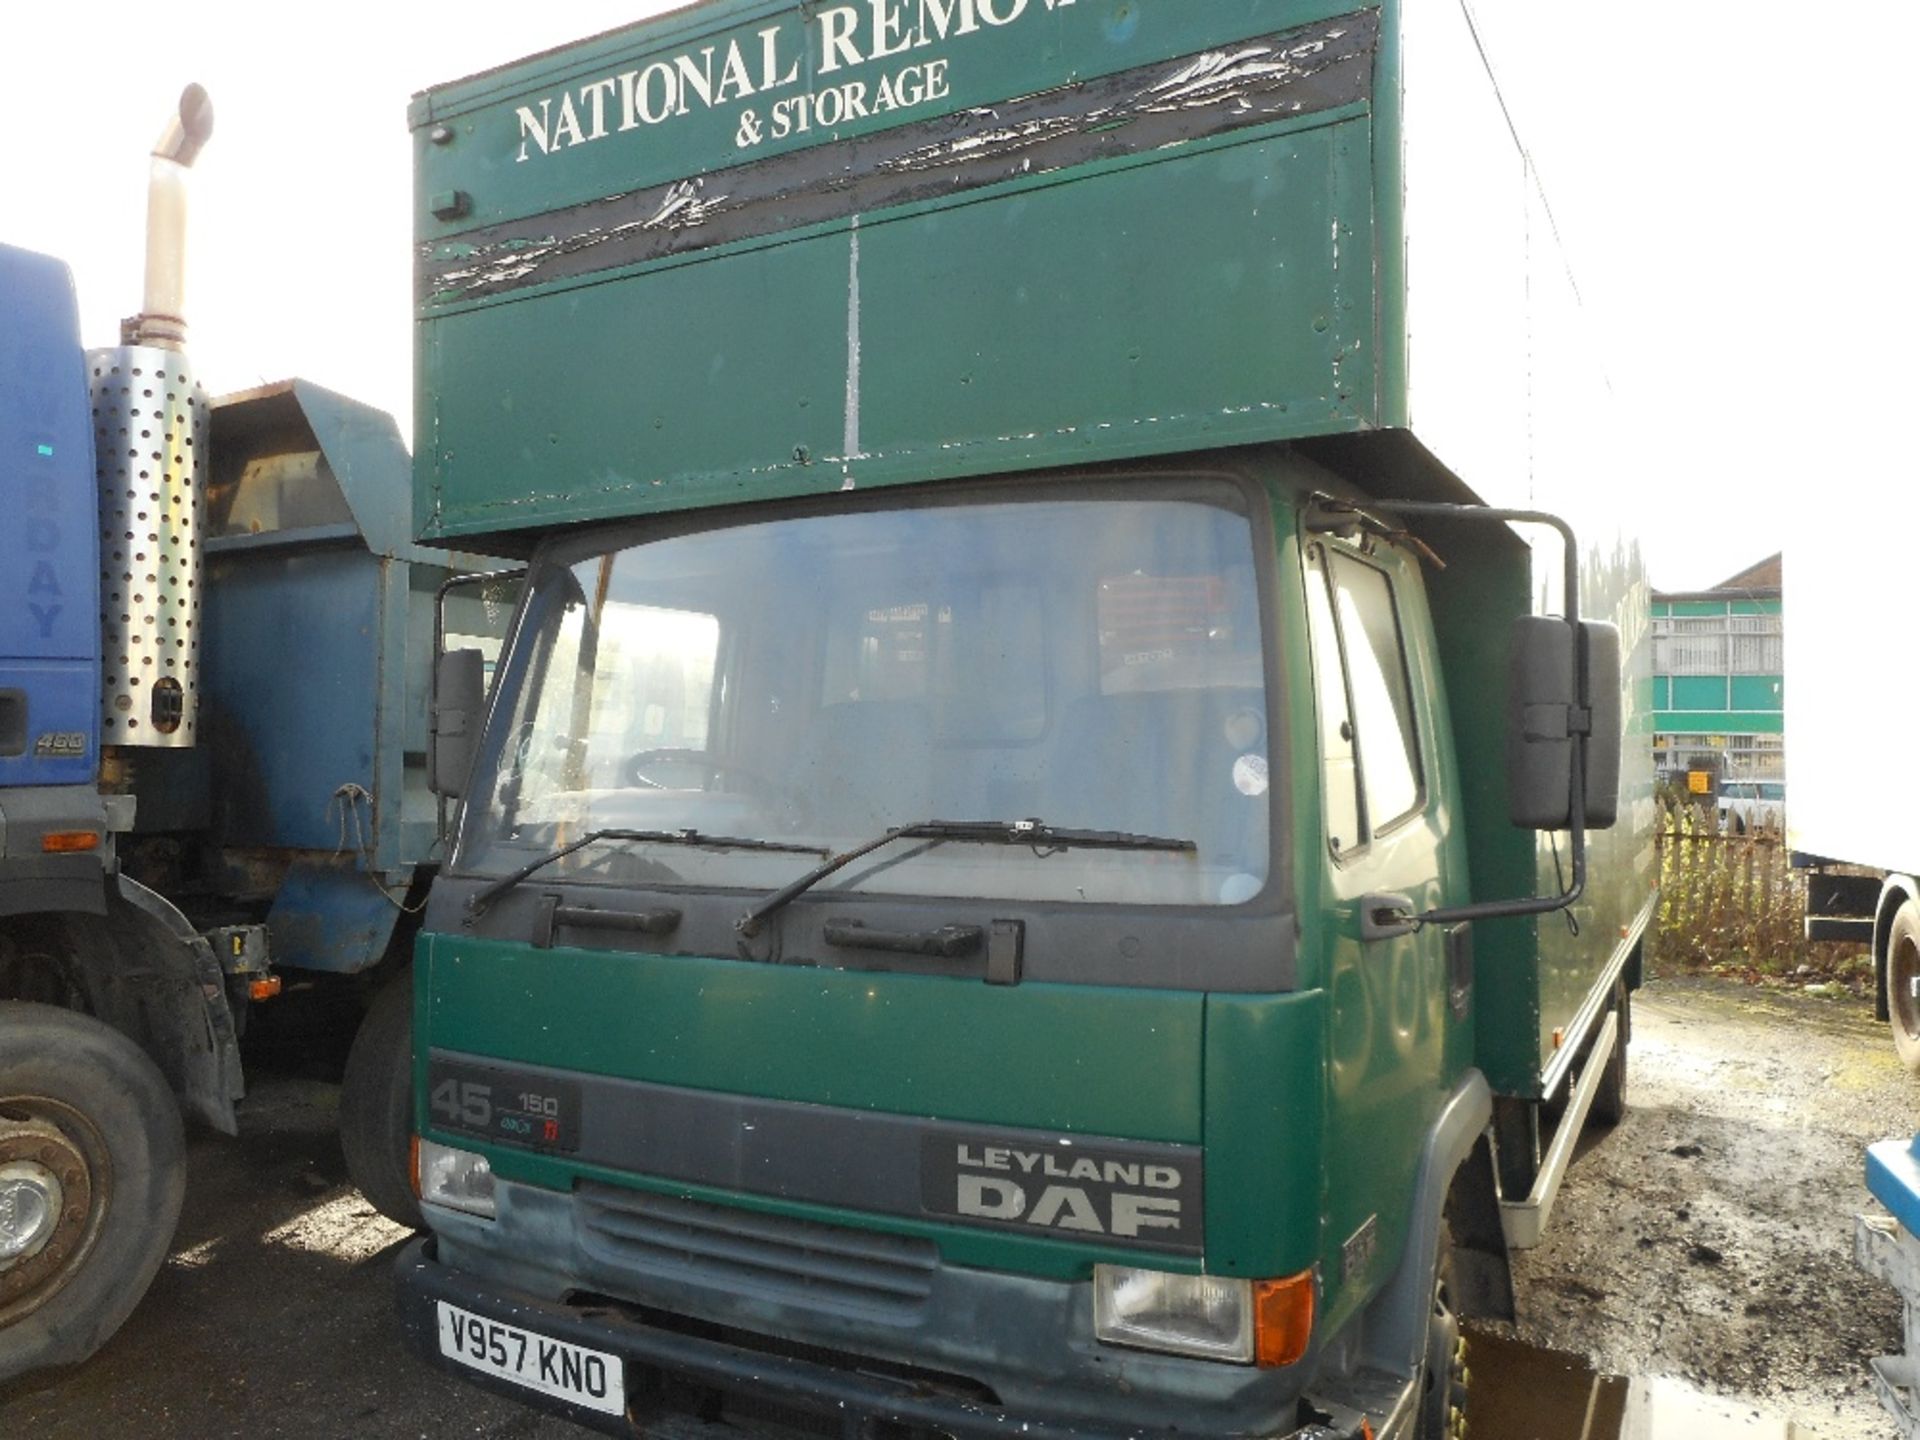 DAF 45 7500kg rated removal lorry year 1999  approx reg:V957 KNO.